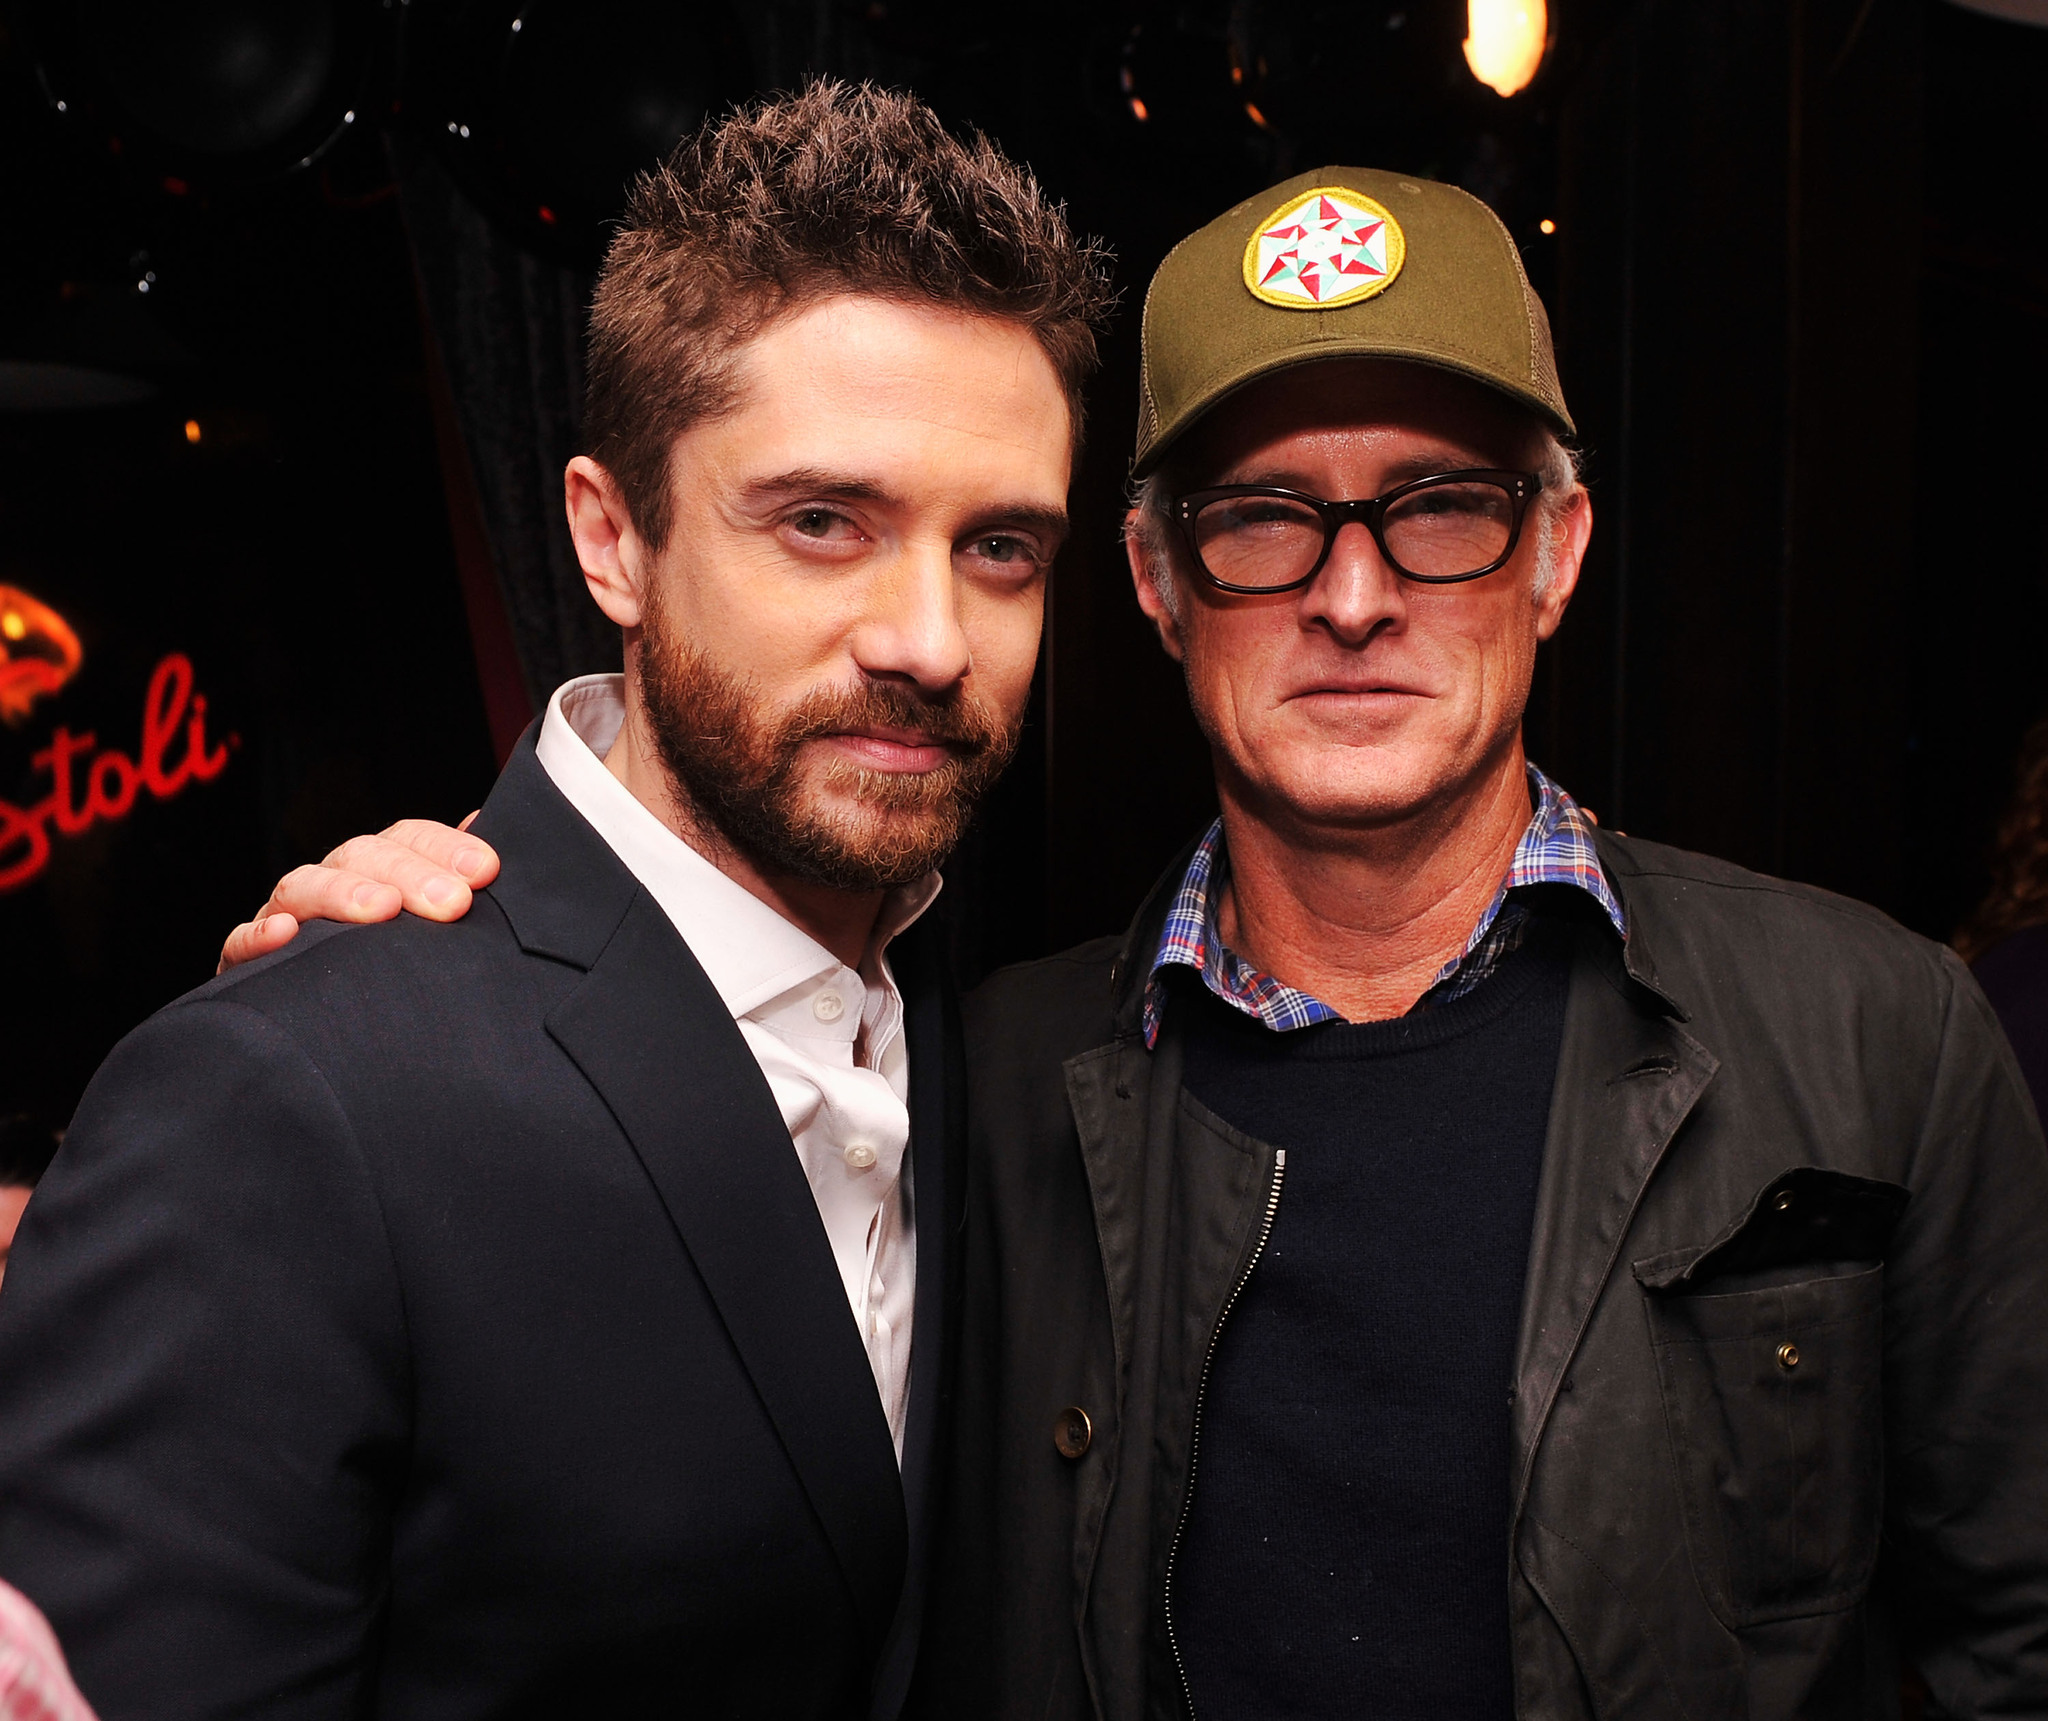 Topher Grace and John Slattery at event of The Giant Mechanical Man (2012)